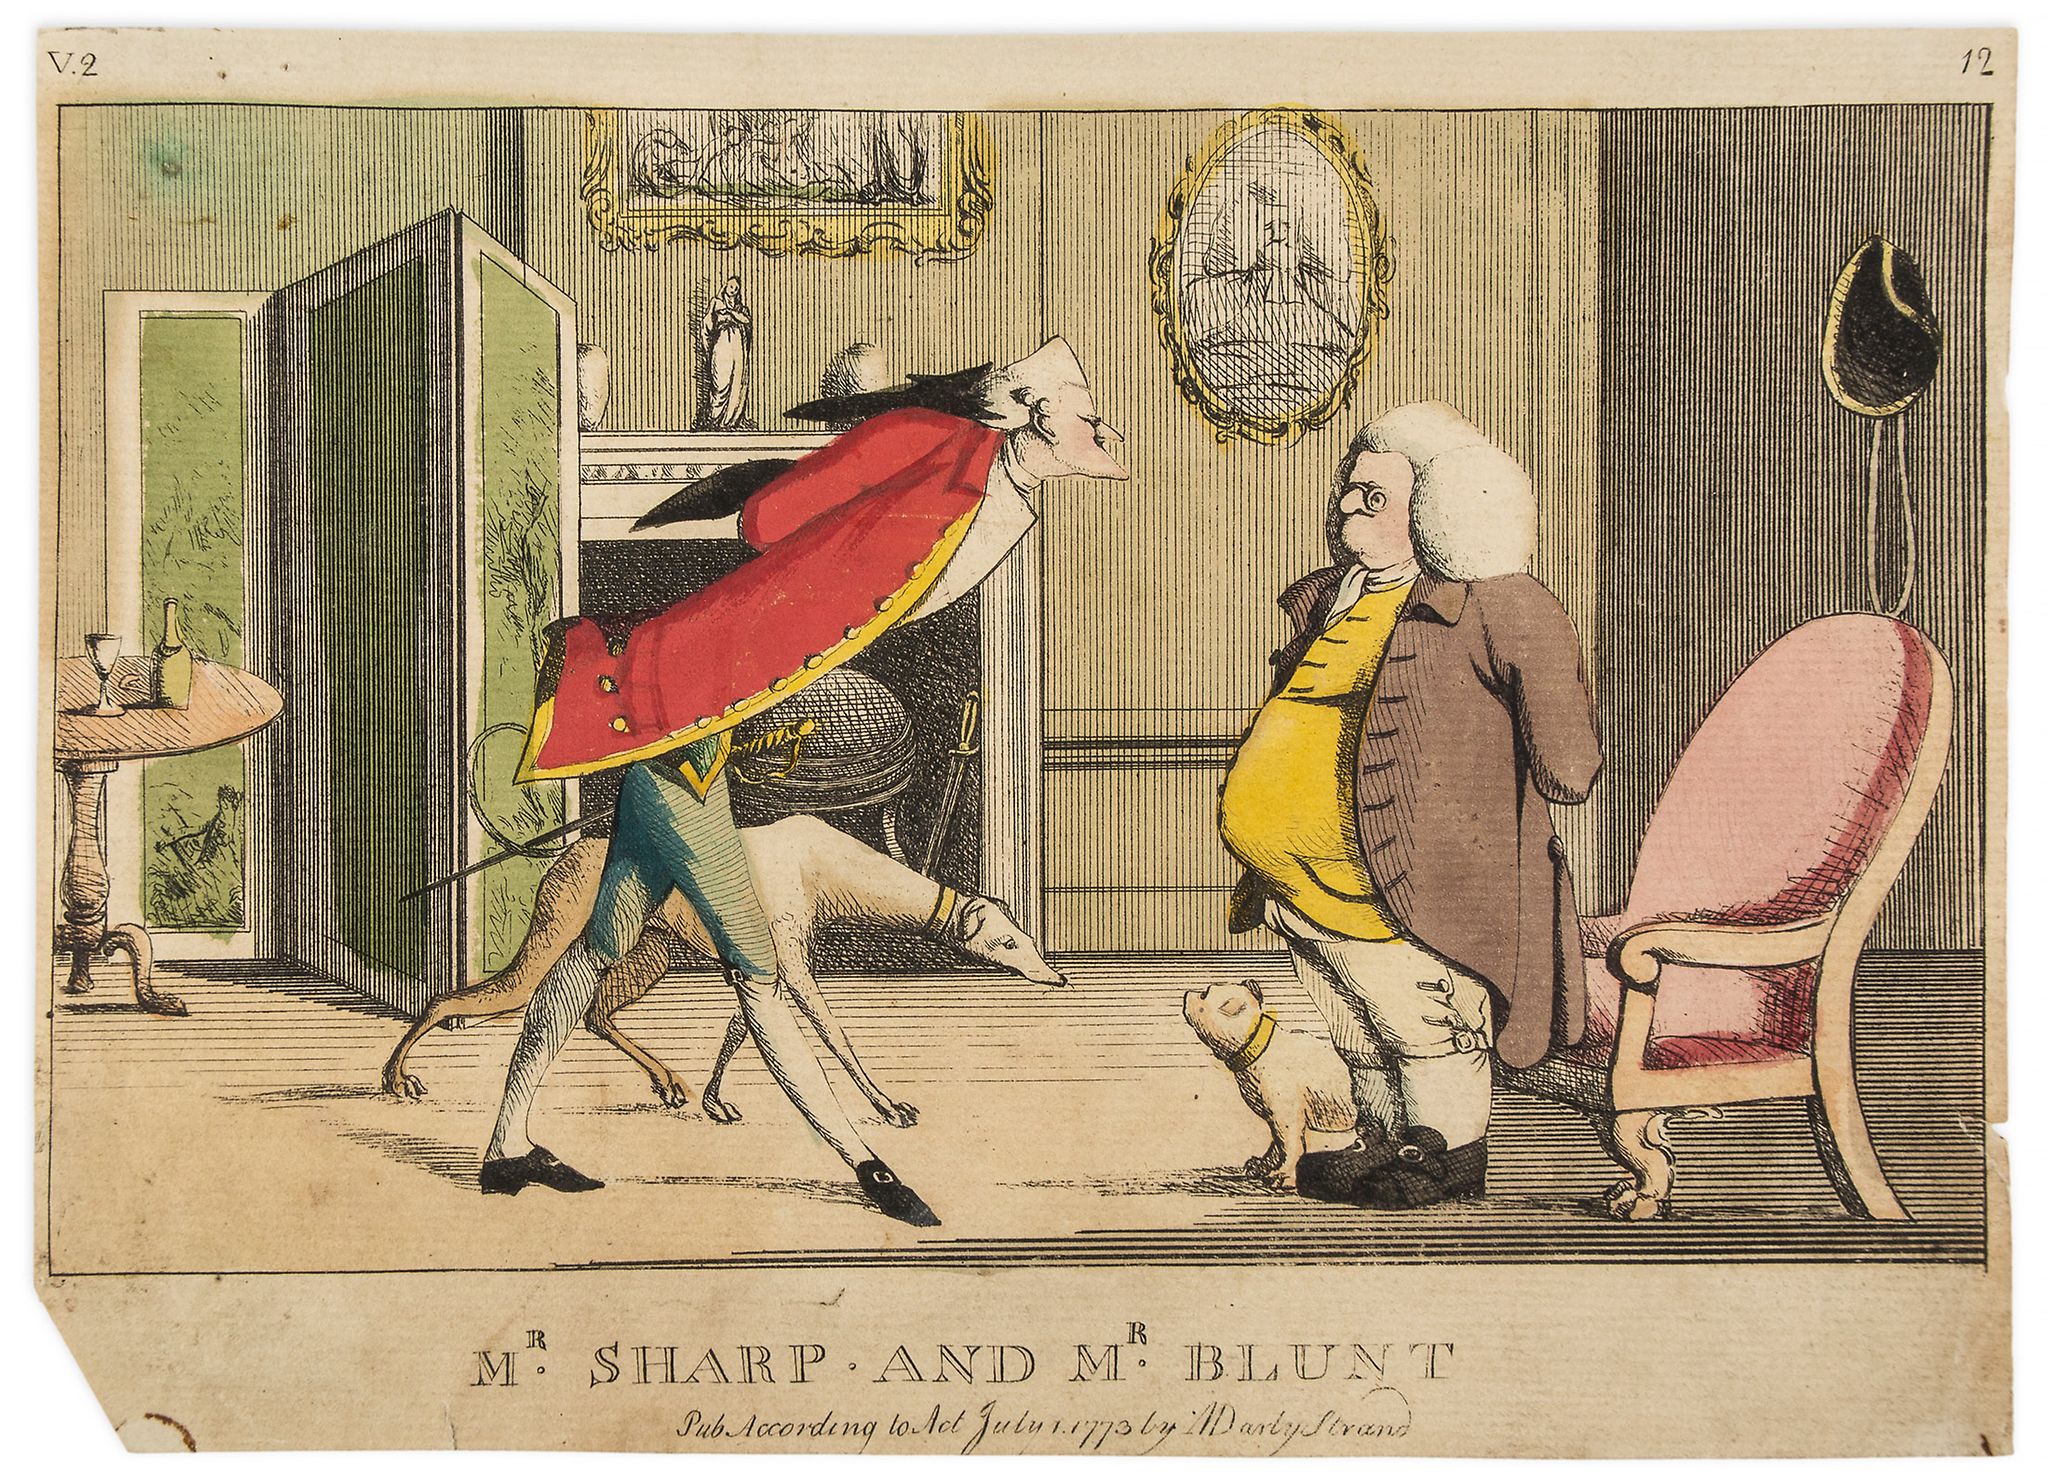 Darly (Matthew) - Mr Sharp and Mr Blunt,  social satire of two gentlemen in an interior, one tall - Image 3 of 3